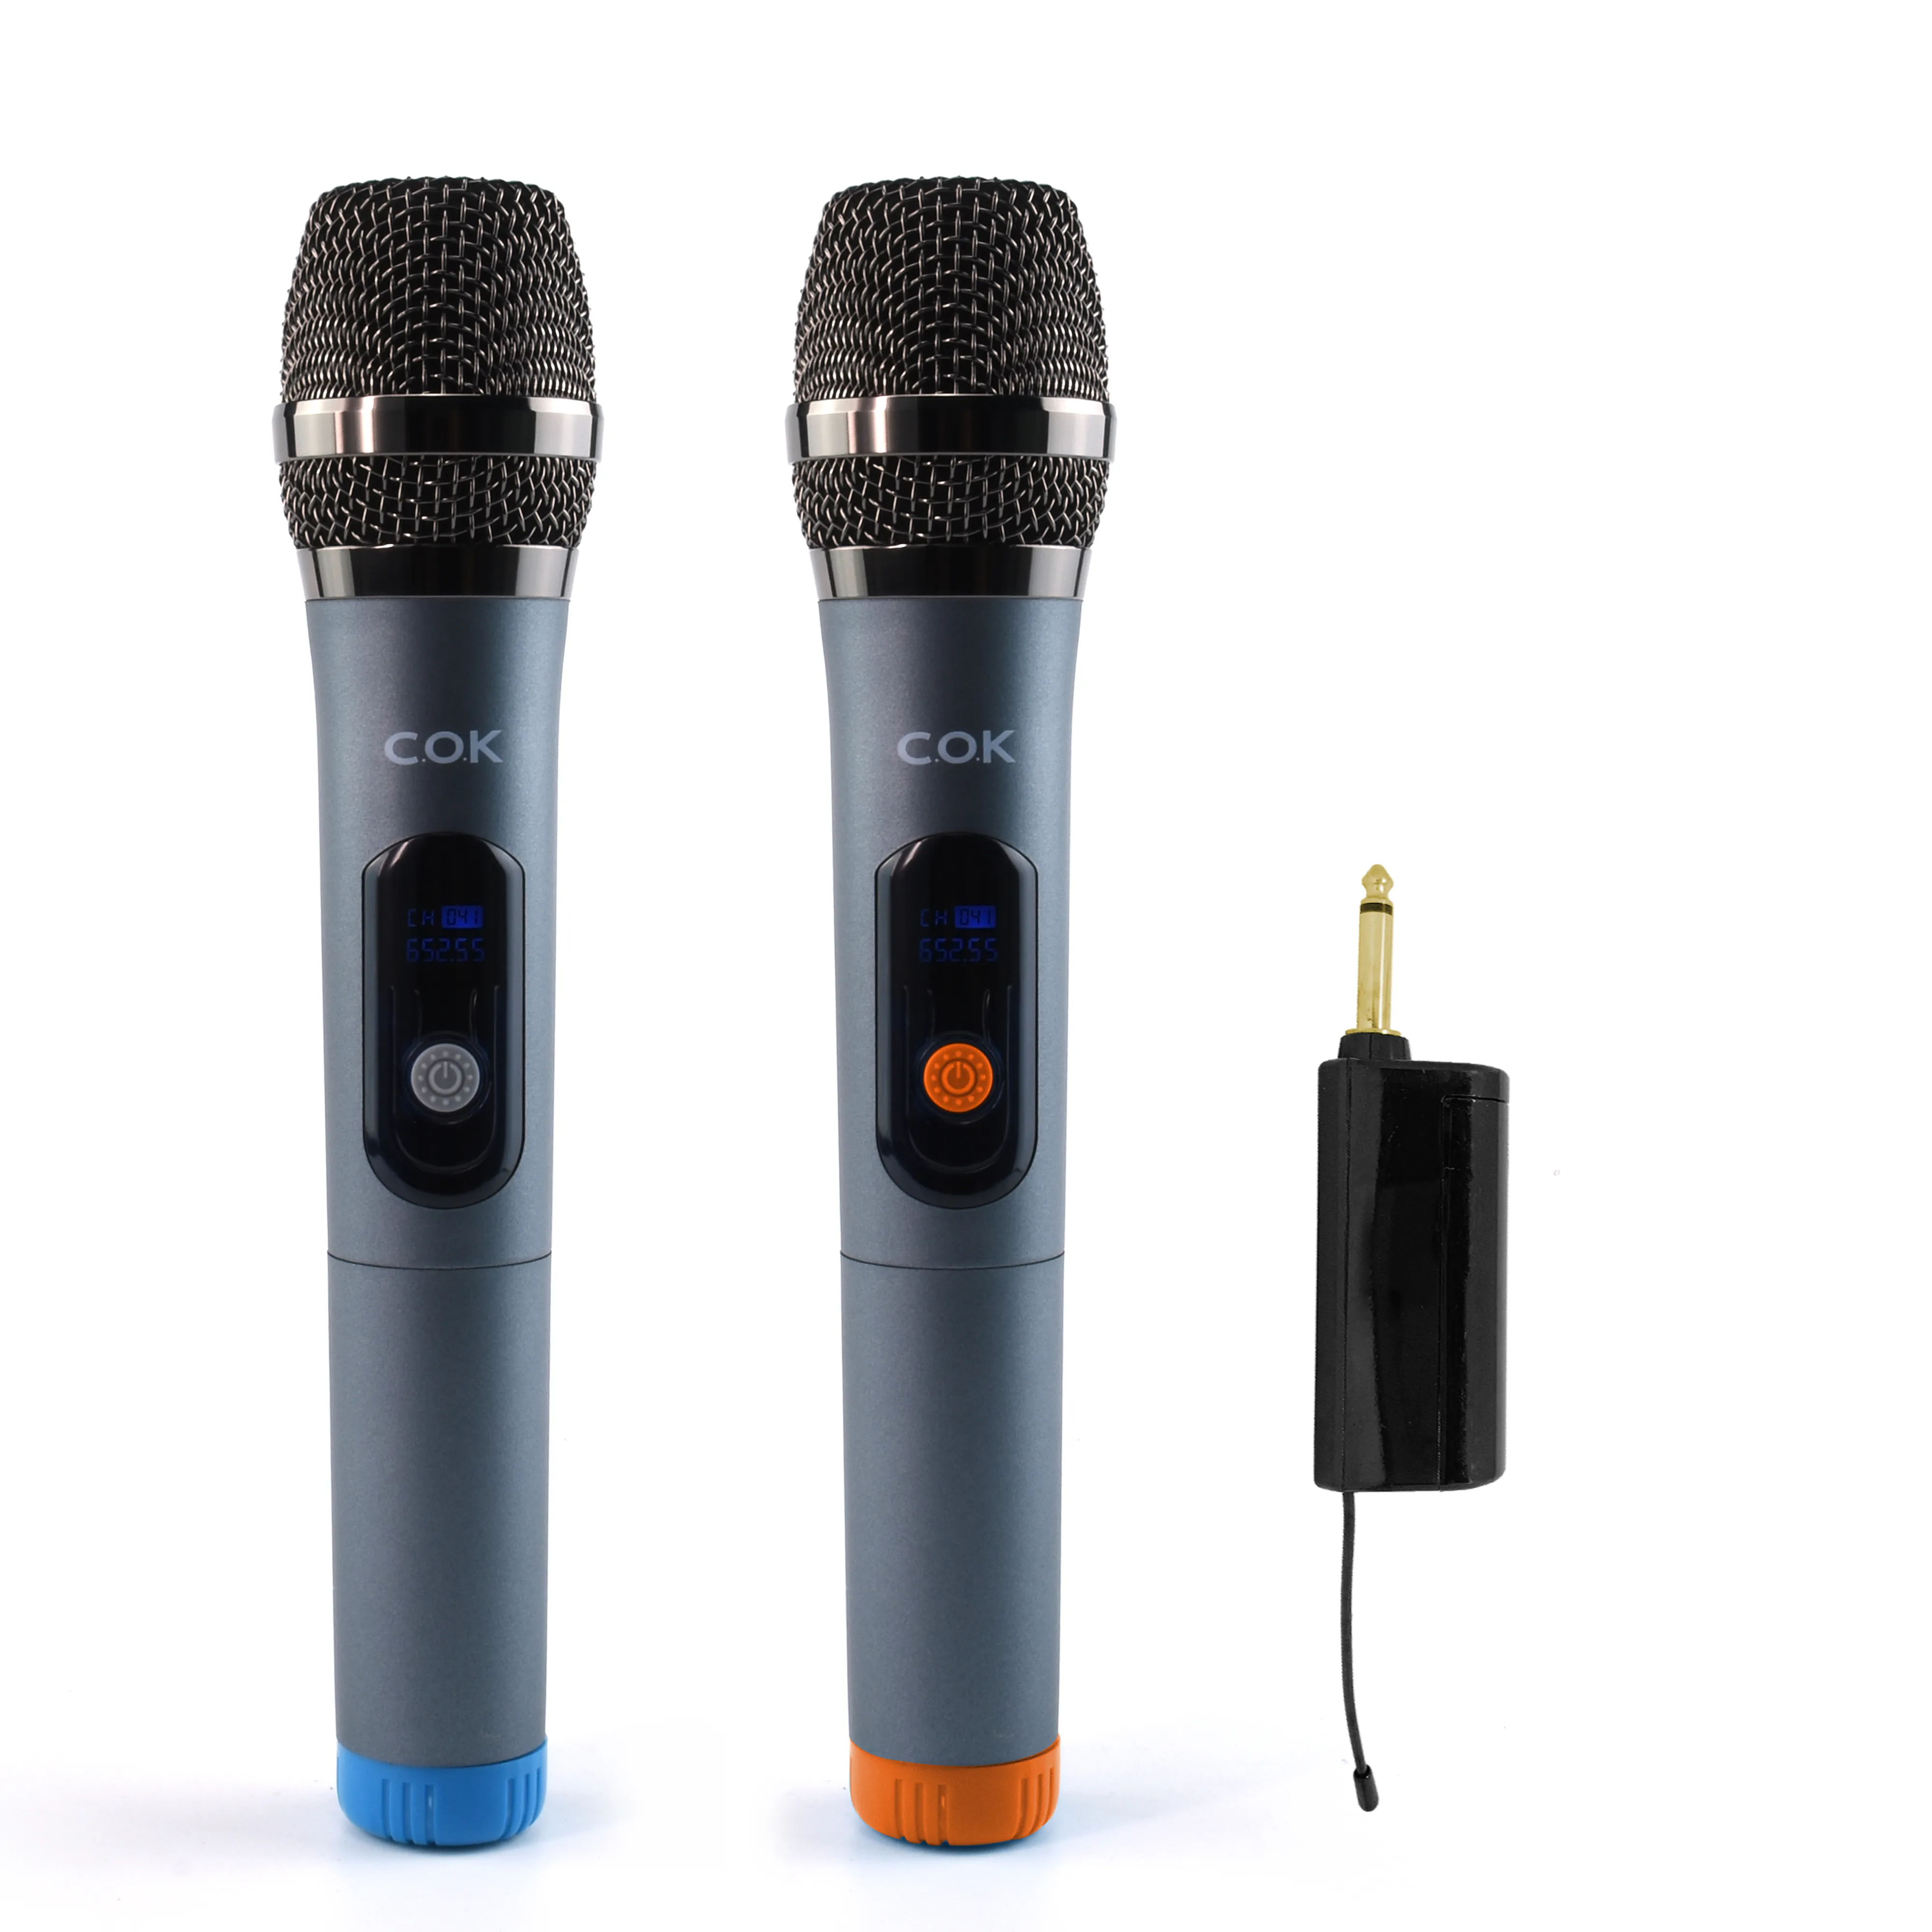 900Mhz portable dual handheld dynamic uhf fm mobile karoke wireless mic with battery operated rechargeable wireless mic